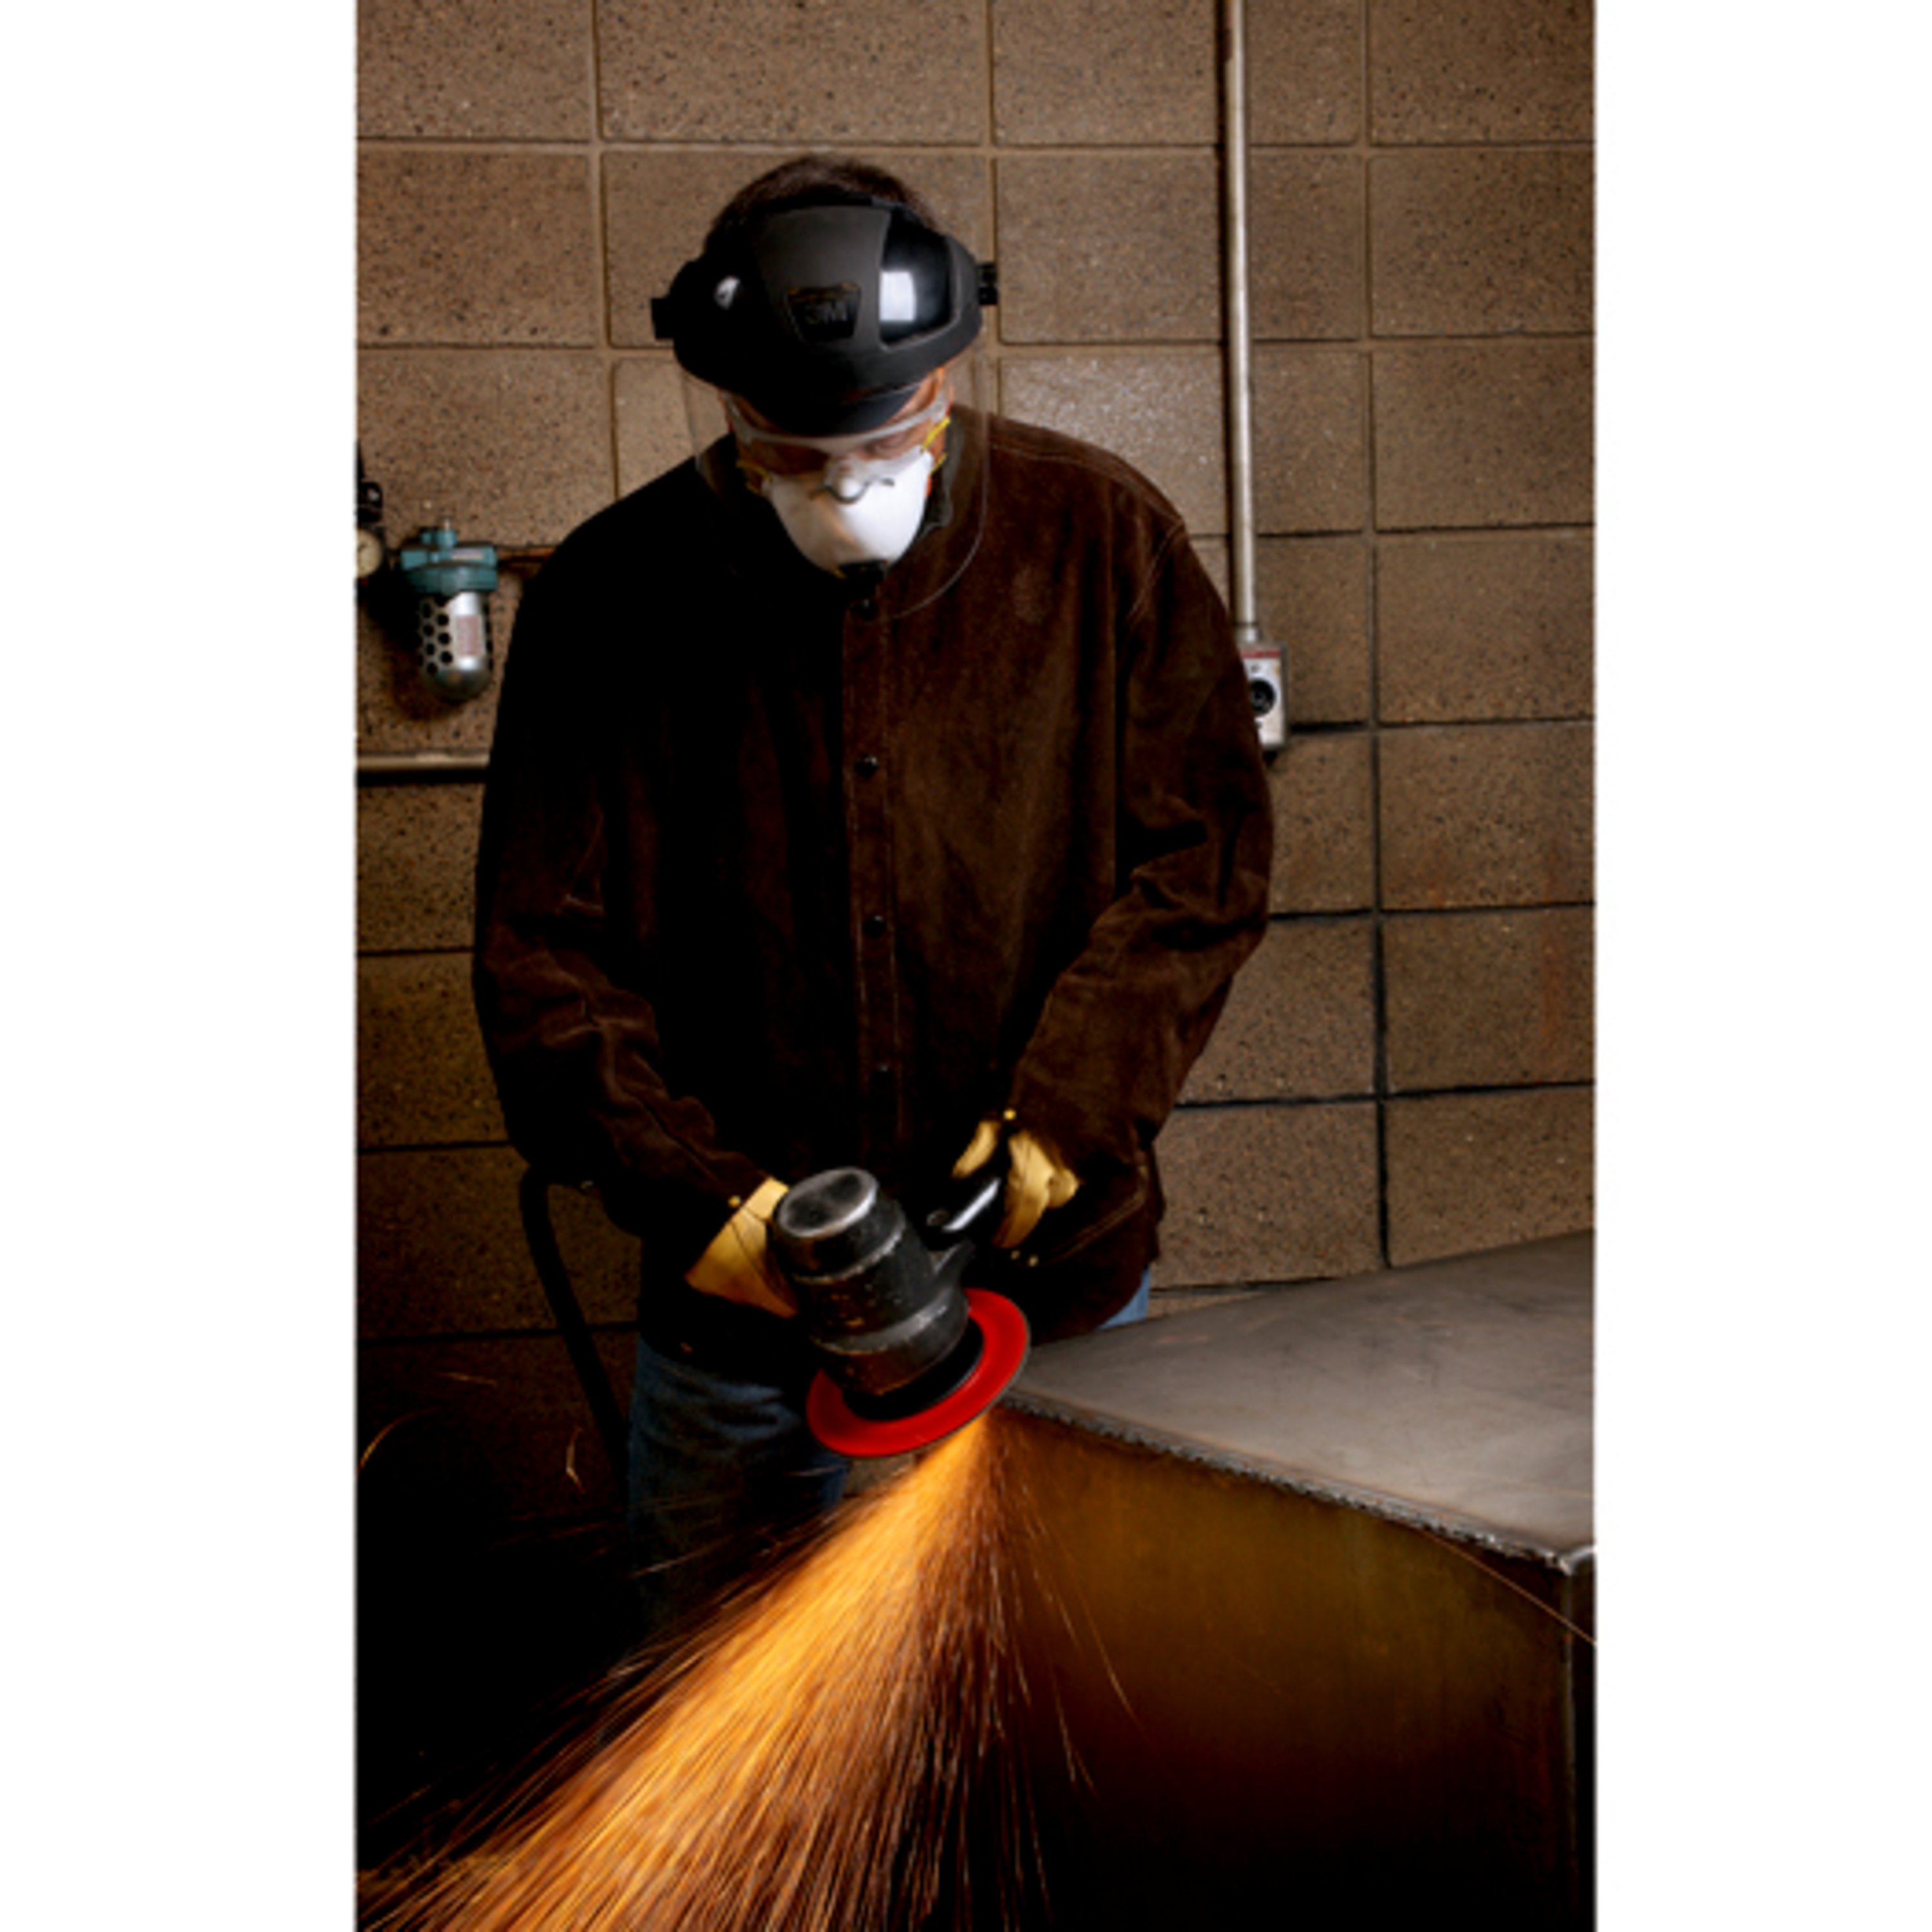 Choose the Cubitron™ II Roloc Fibre Disc 982C for medium to heavy-duty stock removal on carbon steel applications such as edge chamfering, beveling, weld grinding, and removing mill scale, pits and imperfections, machining grooves, and more.